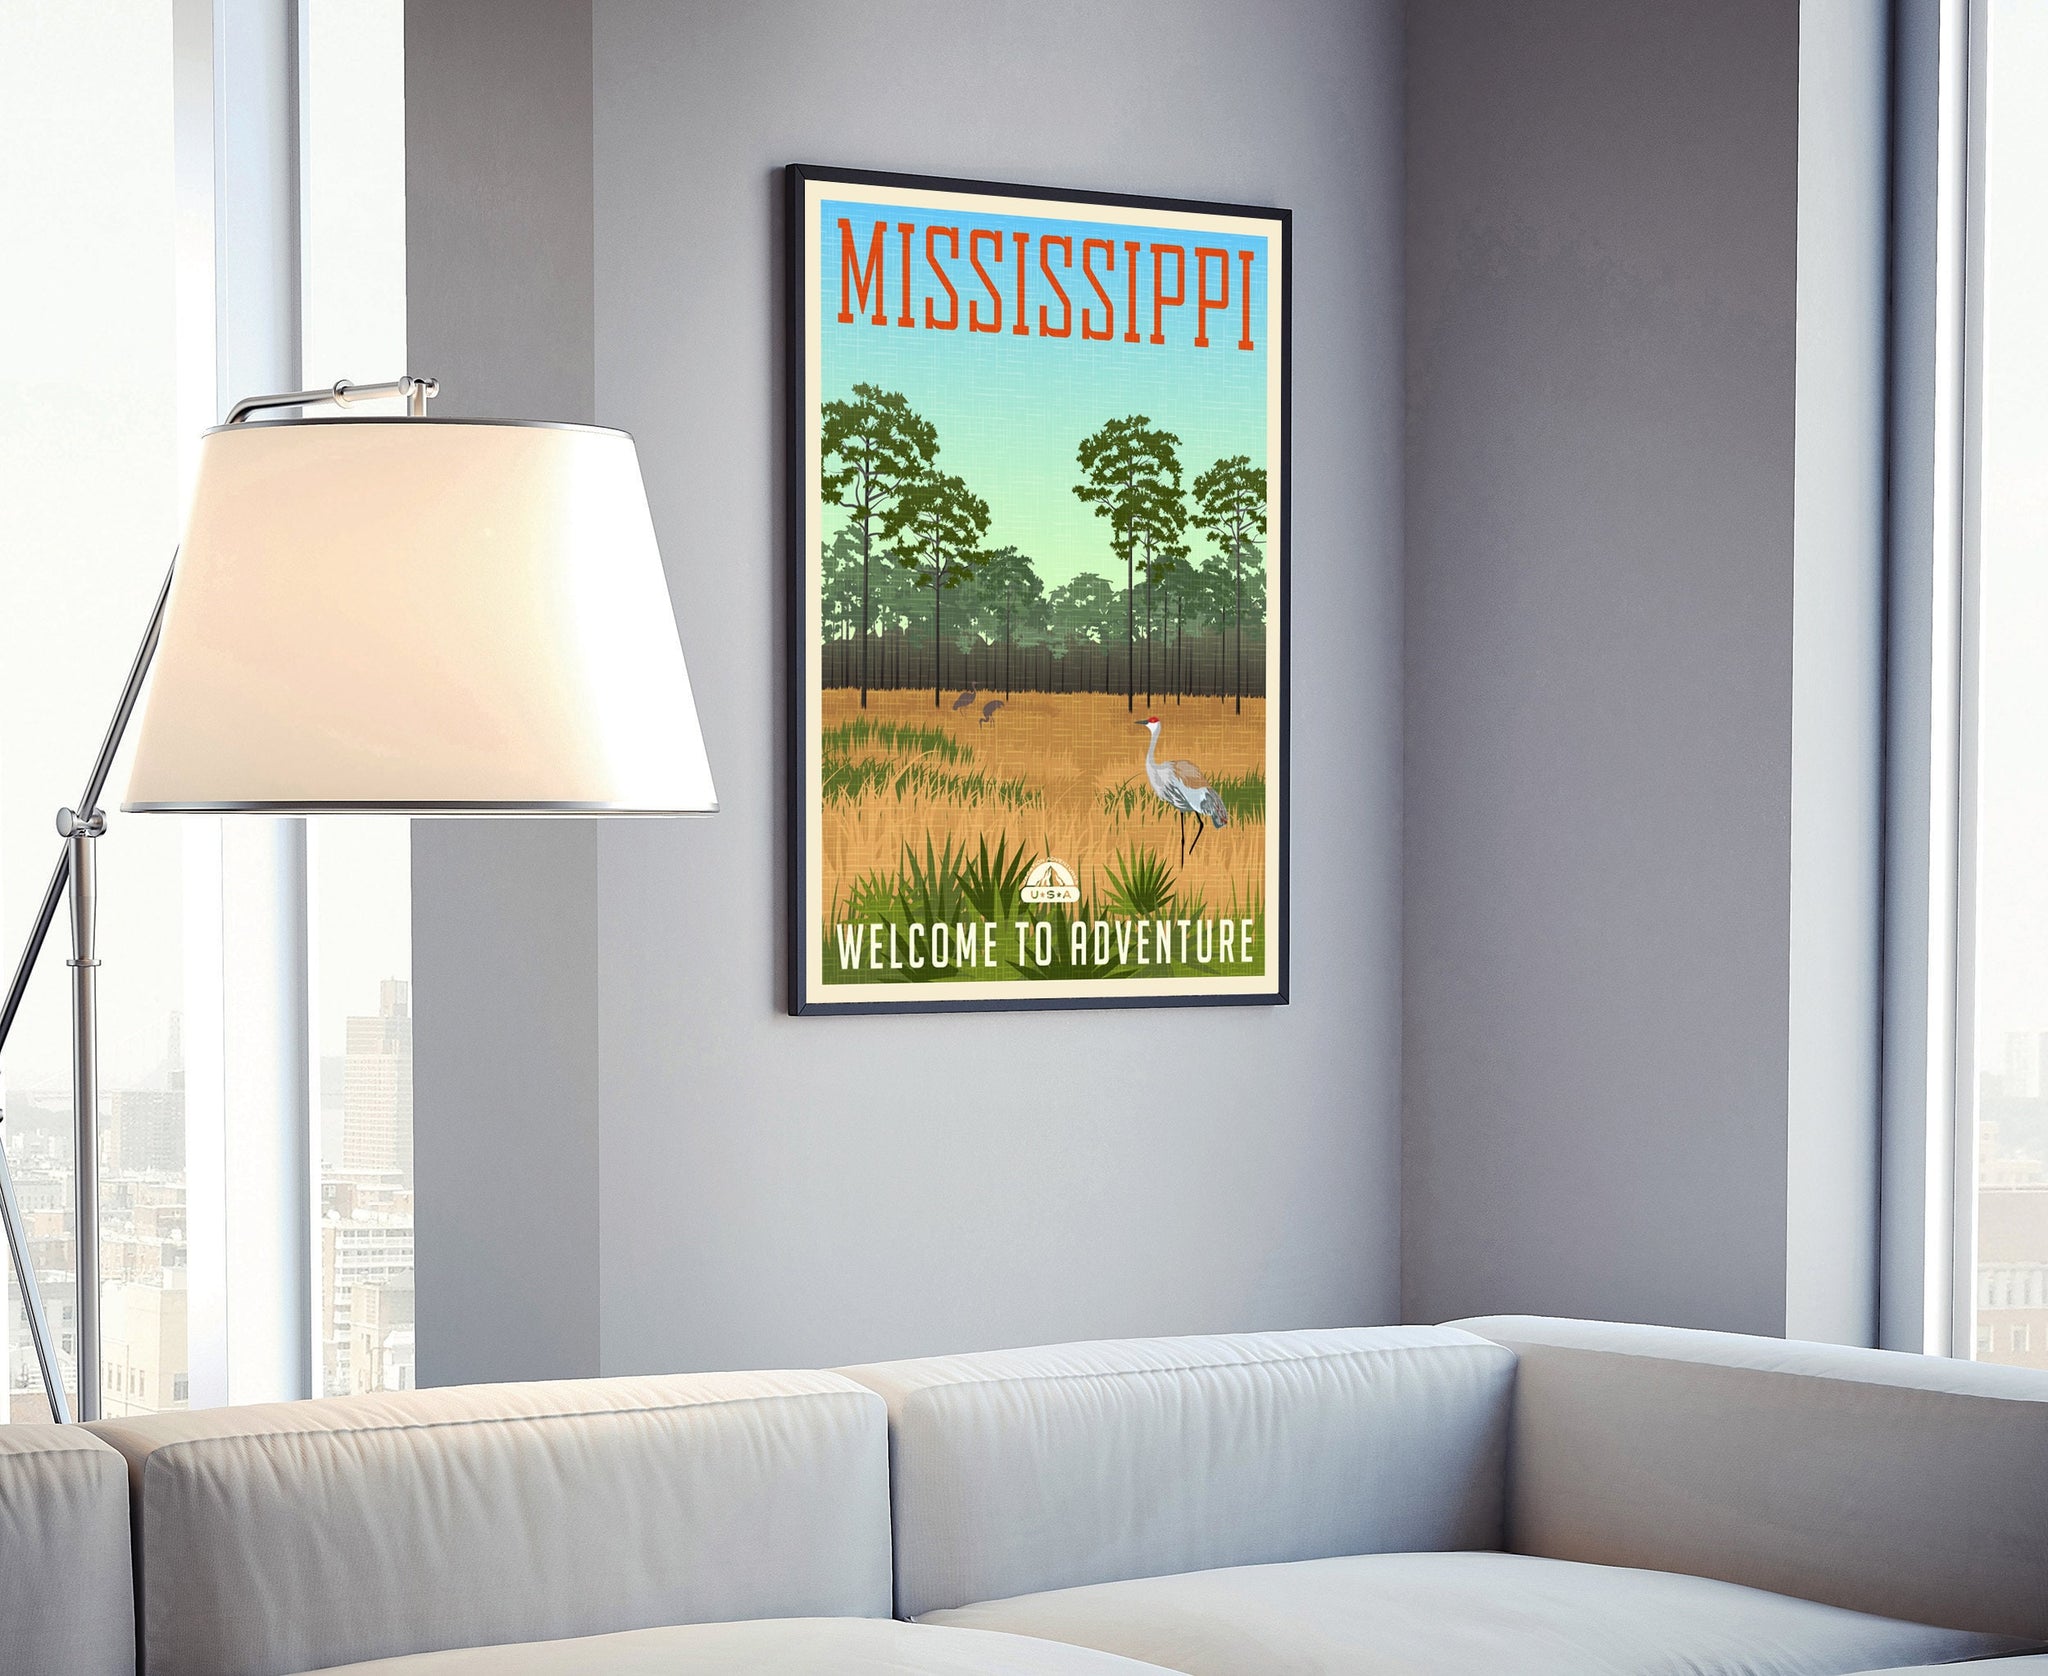 Mississippi Vintage Rustic Poster Print, Retro Style Travel Poster